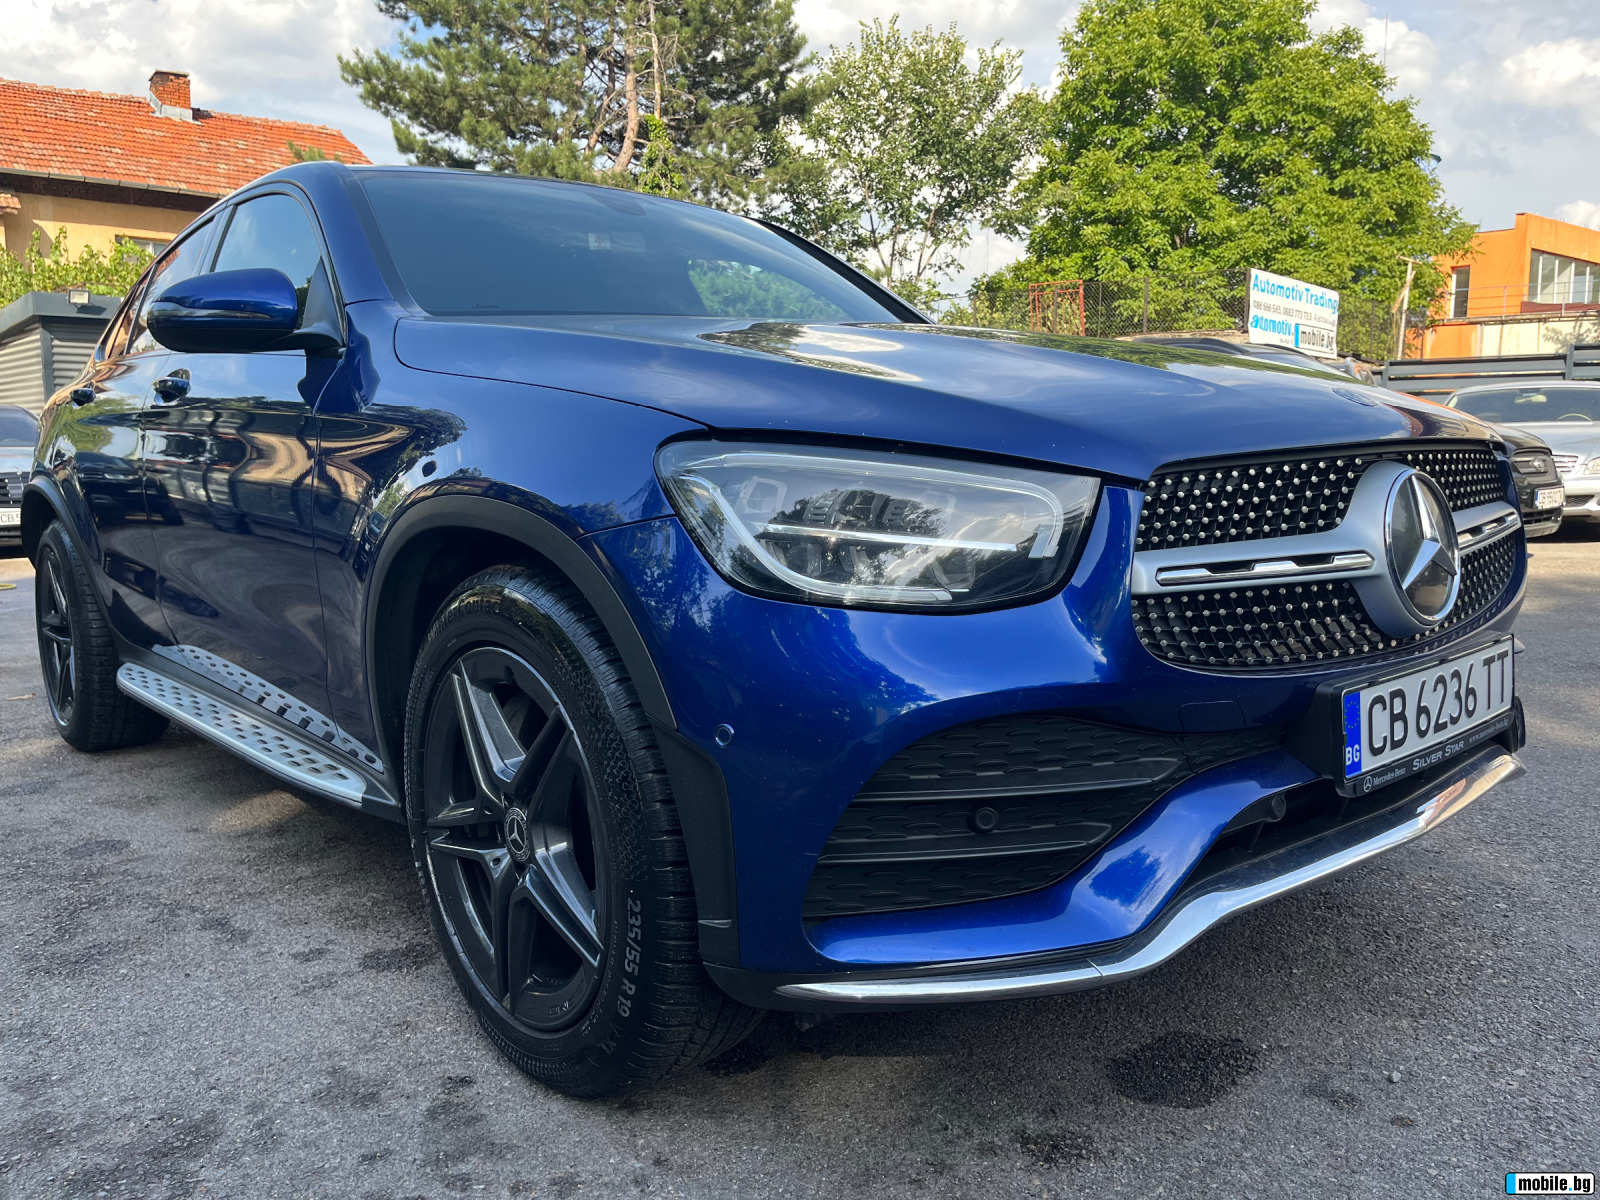 Mercedes-Benz GLC 220 4-Matic/AMG/Facelift/Coupe | Mobile.bg   2